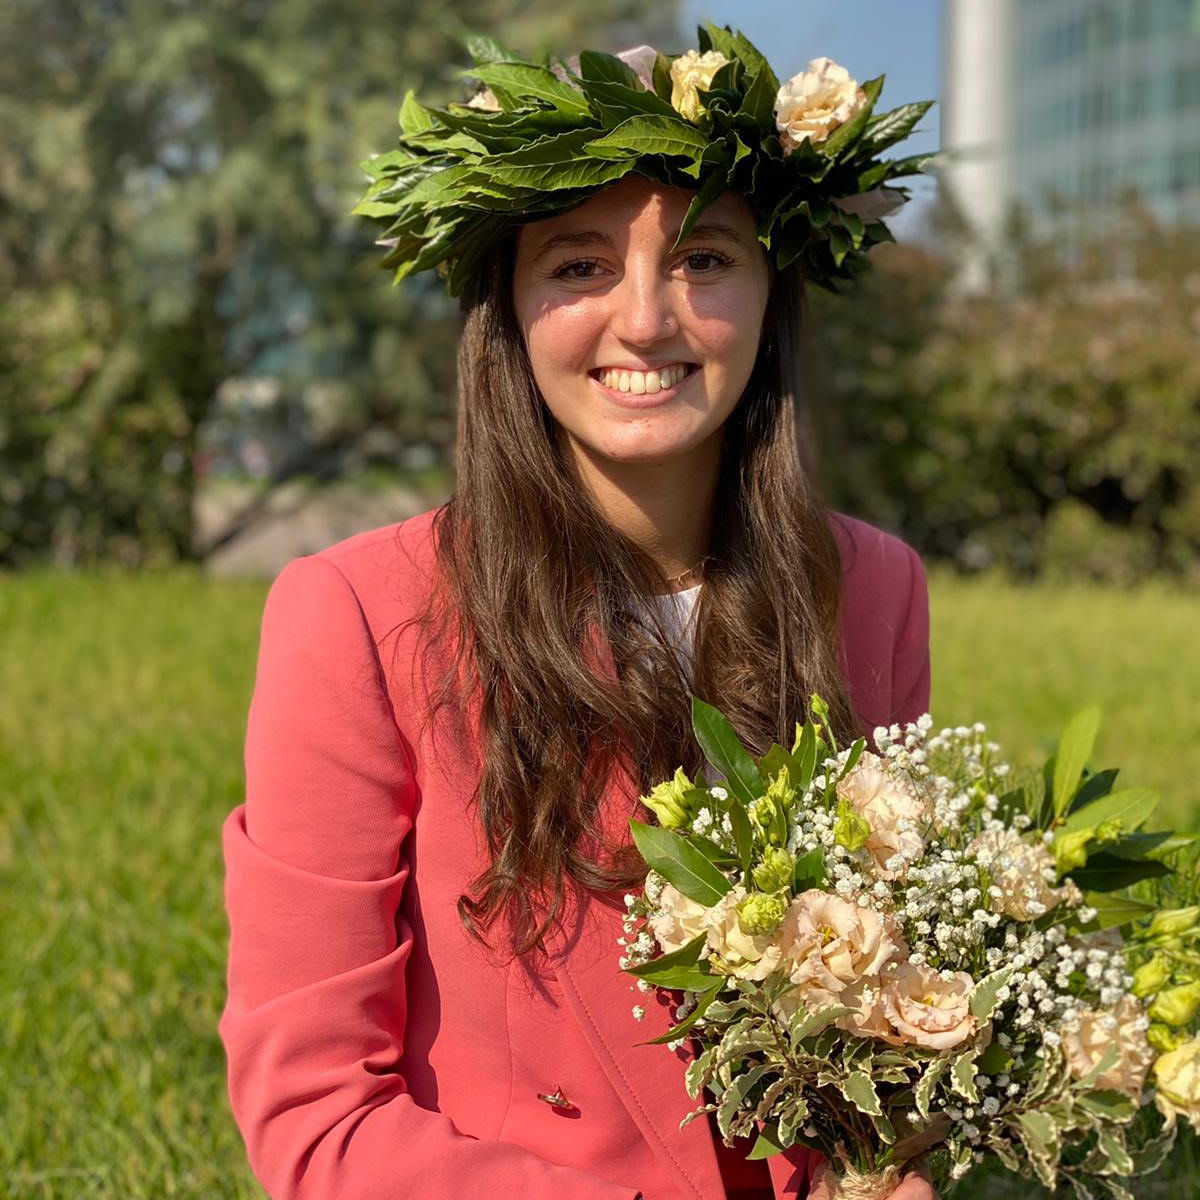 woman with long chestnut brown hair, smiling at the camera. She has flowers in her hair and hands. 